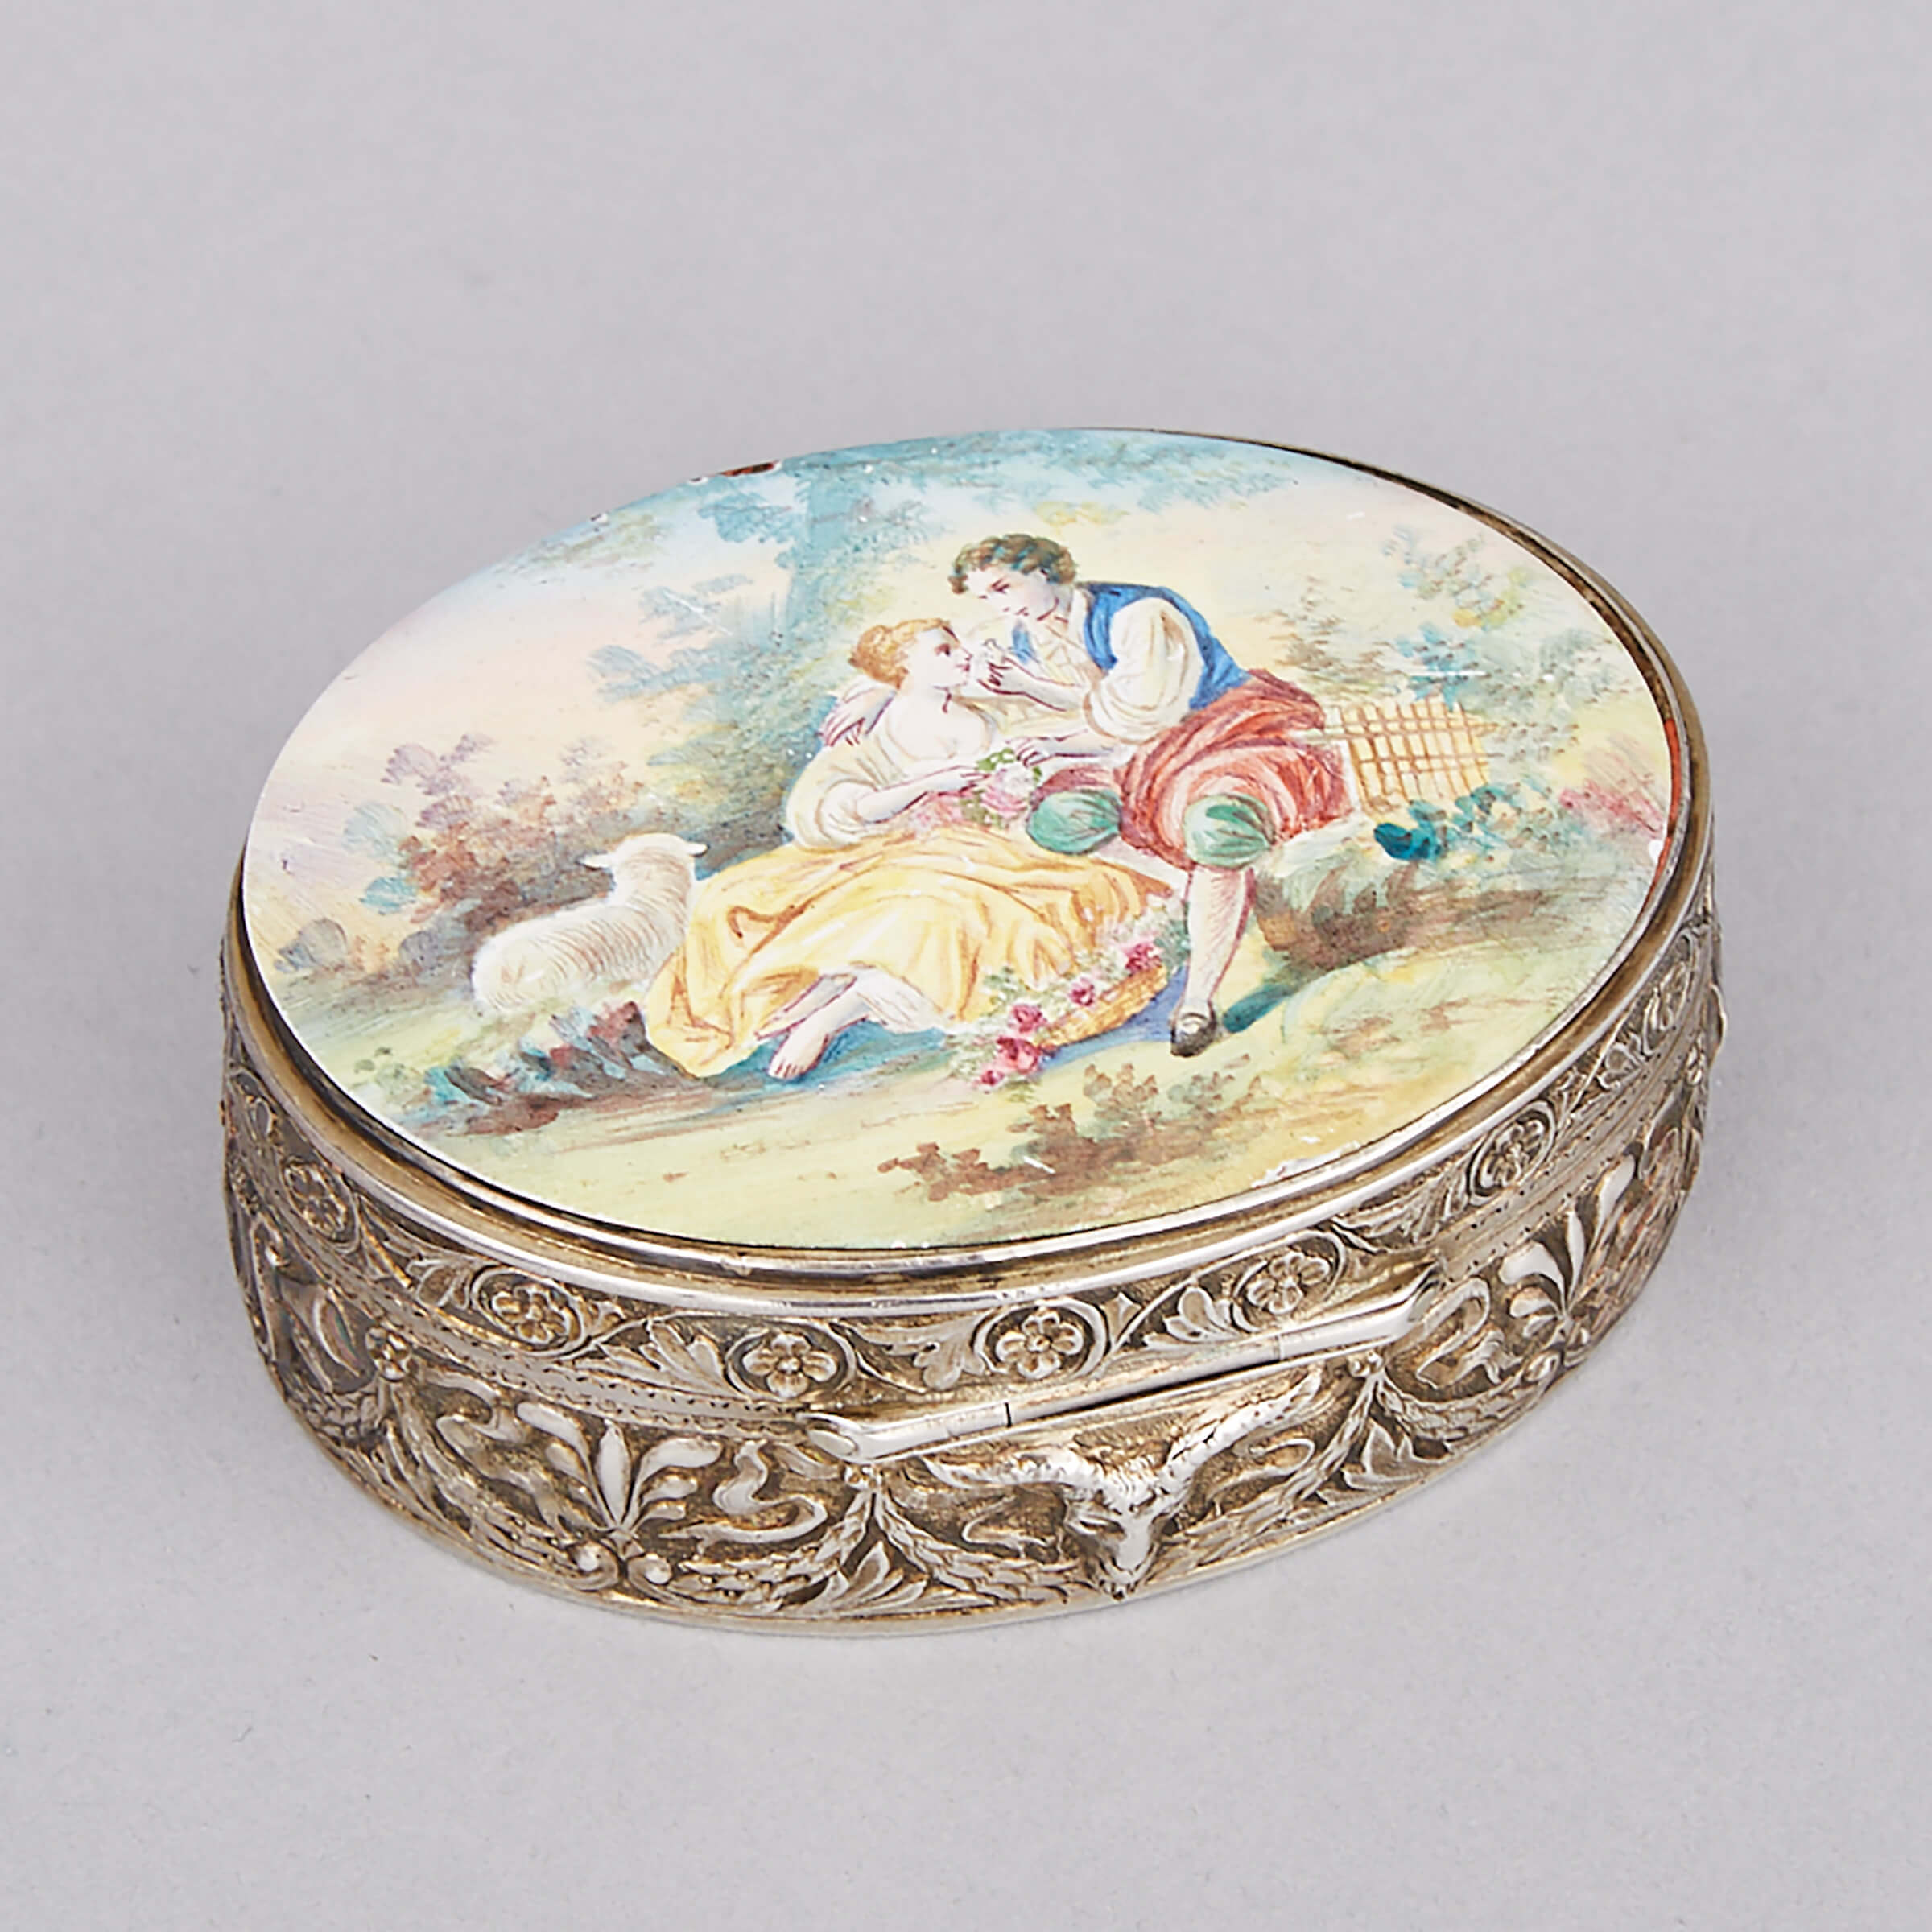 Continental Silver and Painted Enamel Oval Snuff Box, c.1900